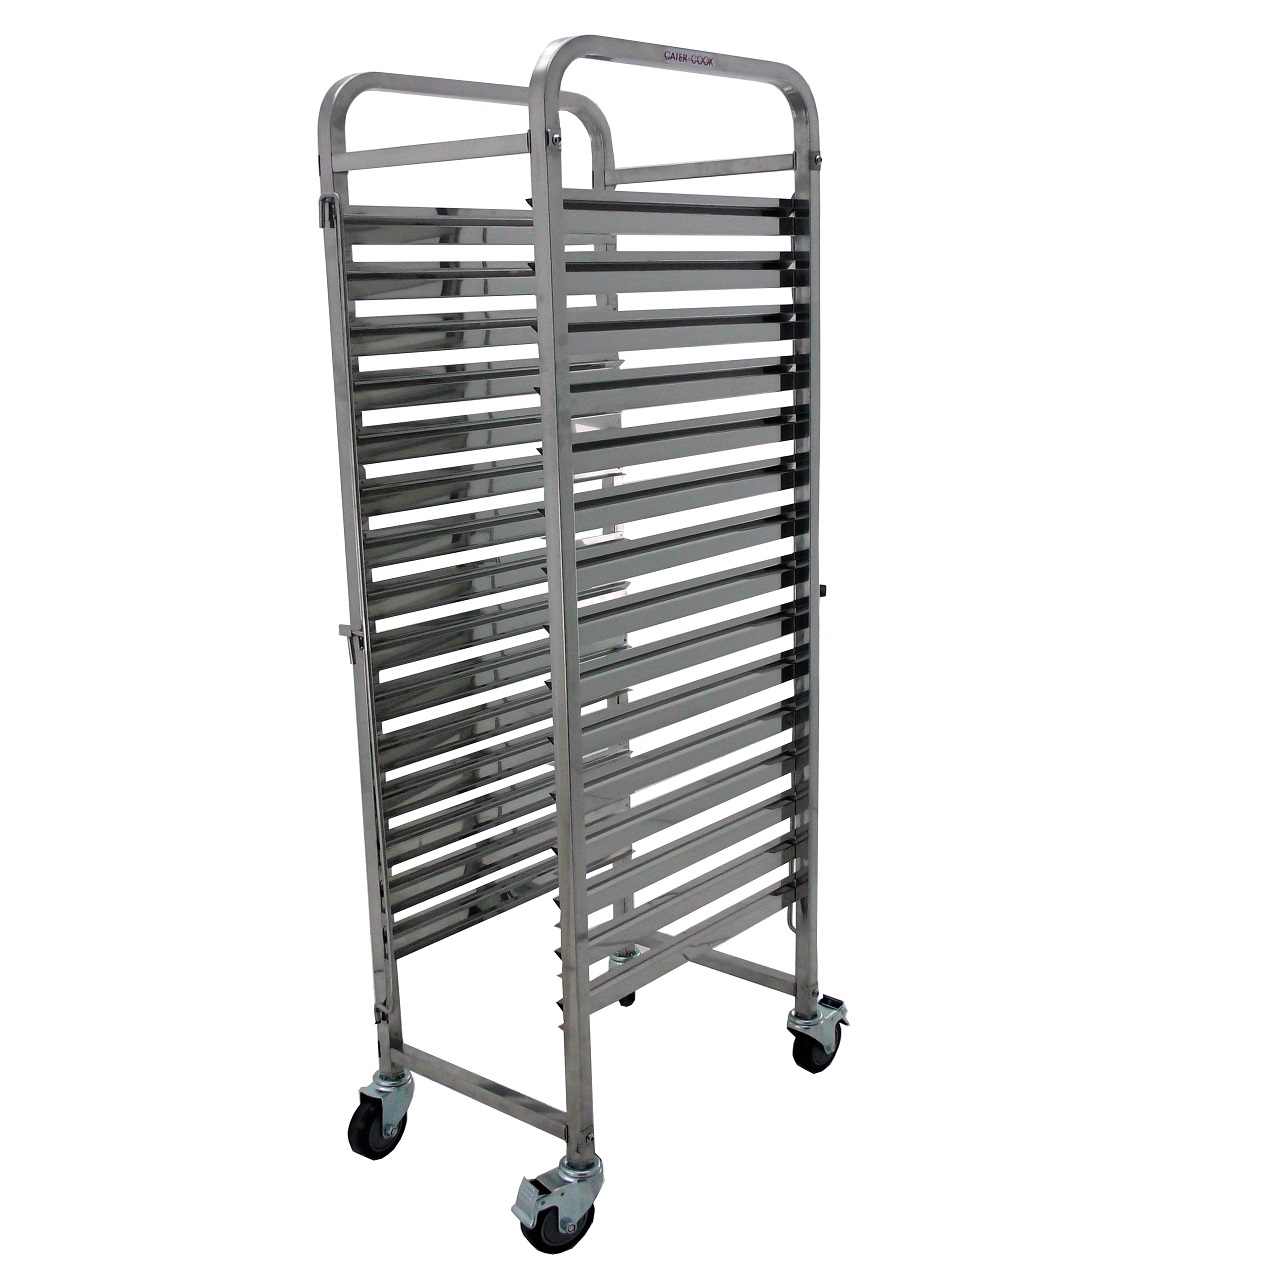 Cater-Prep Gastronorm Racking Trolley - CK0222A 